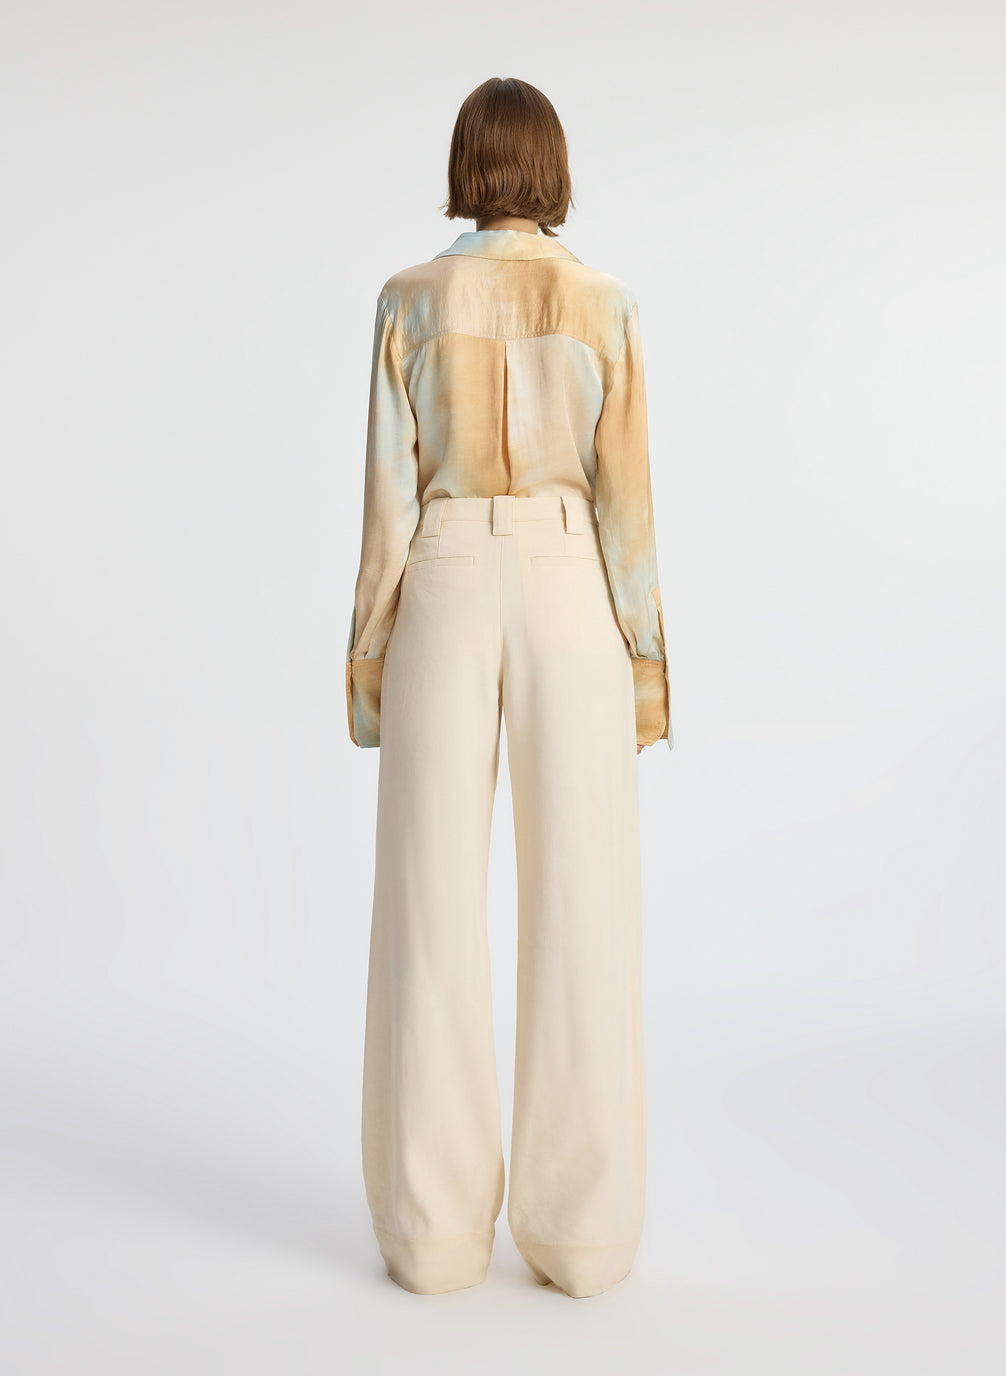 back view of woman wearing long sleeve collared multicolored shirt and beige pants